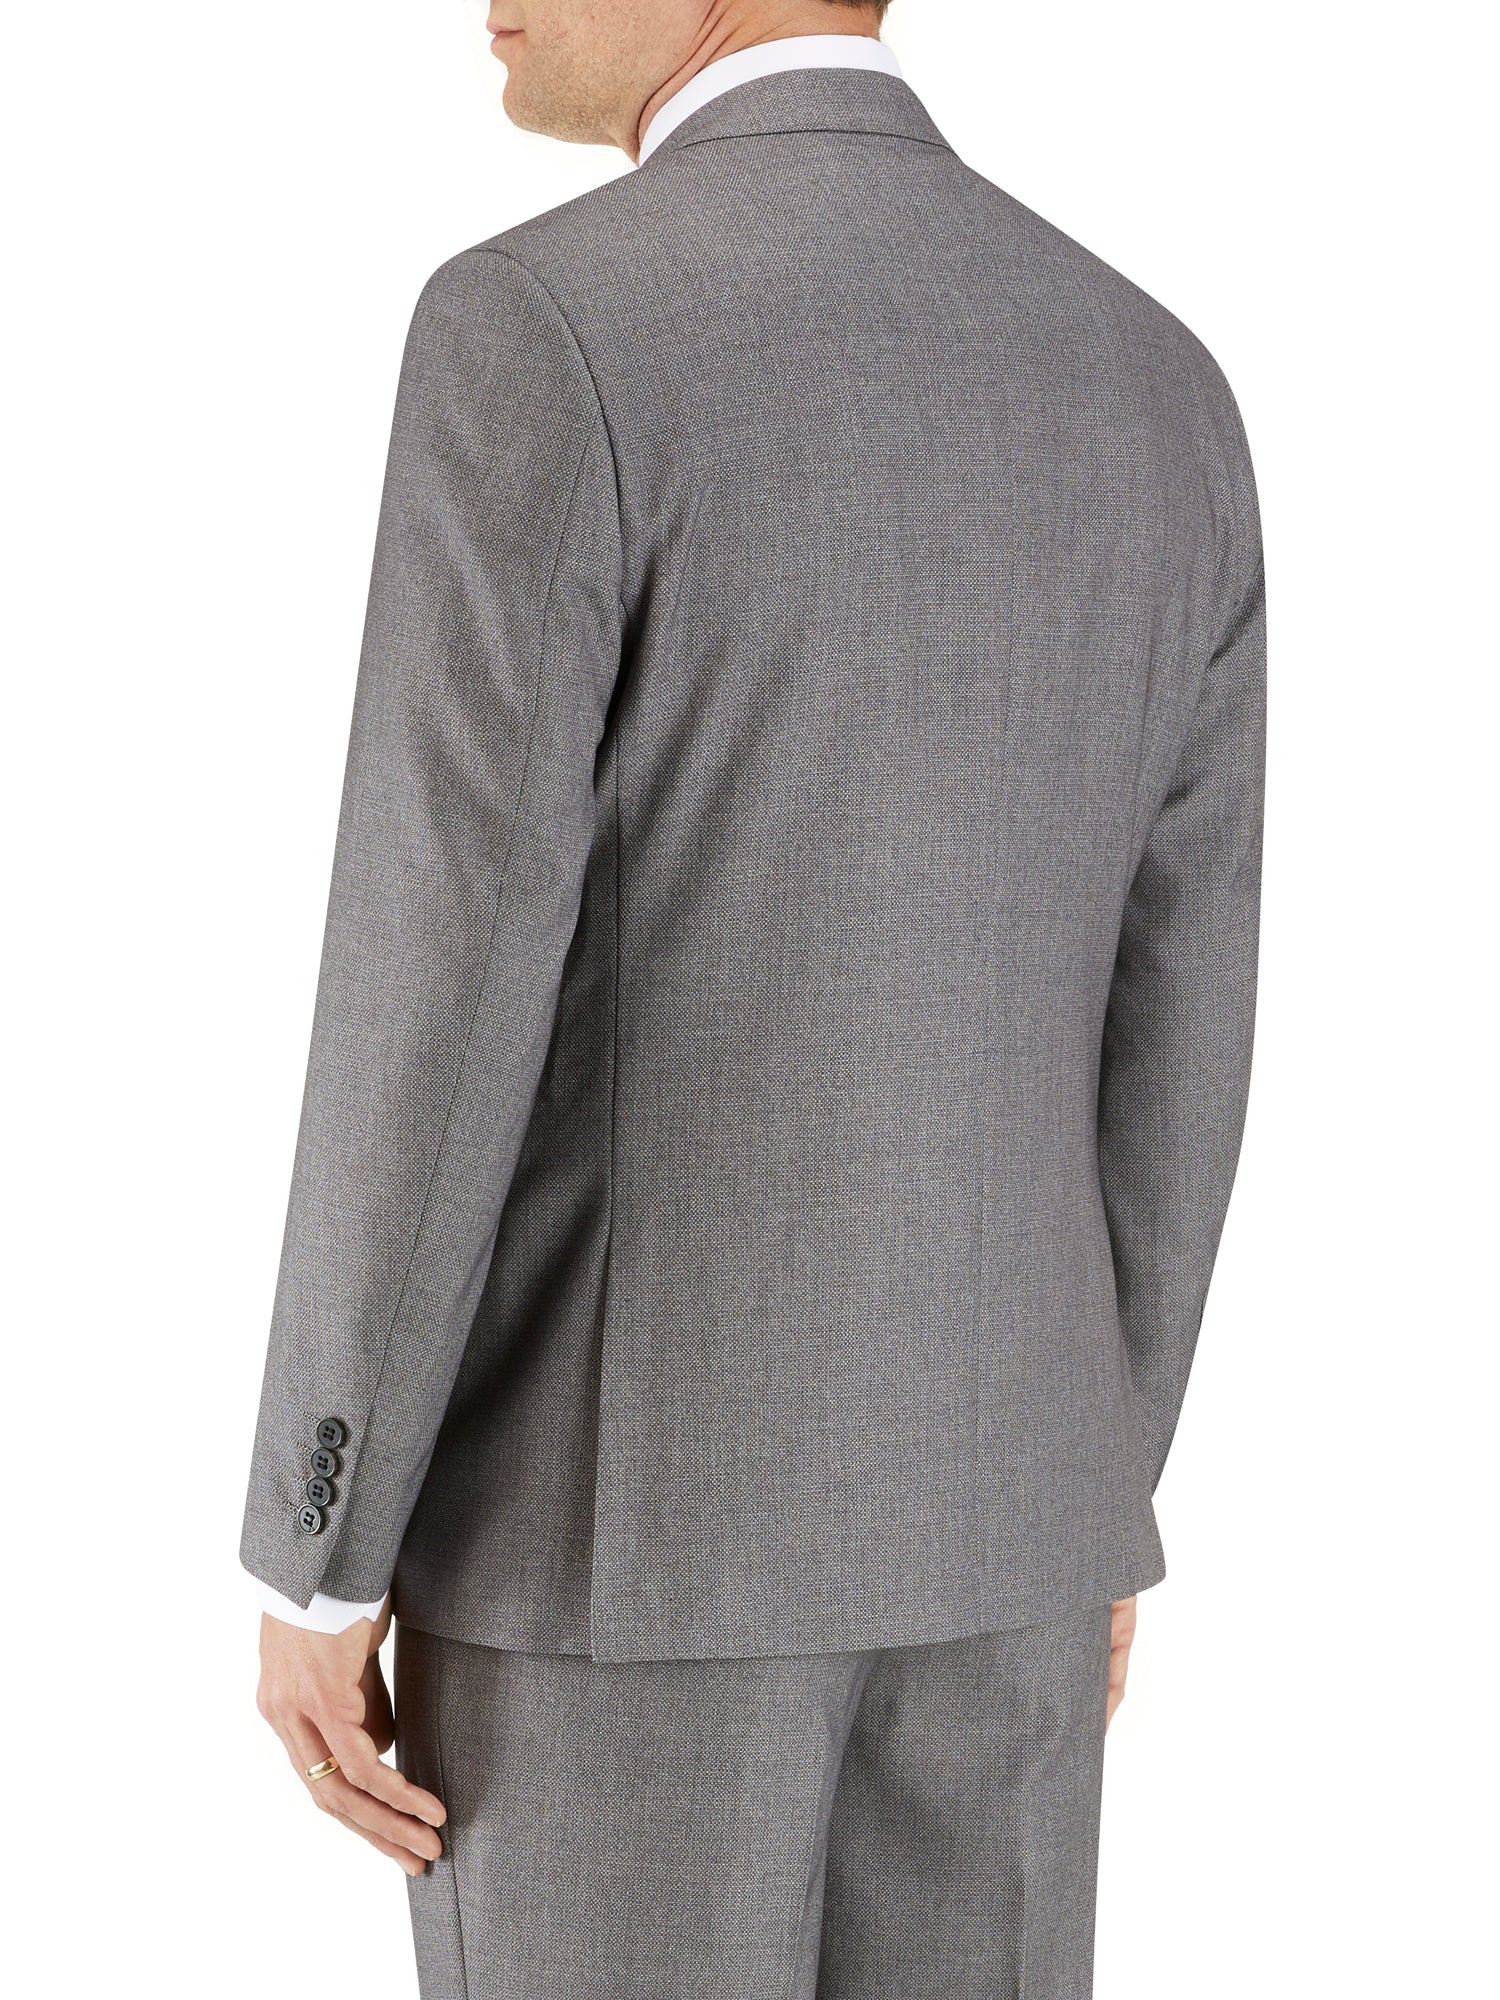 Harcourt Silver Tapered Fit Jacket - Spirit Clothing